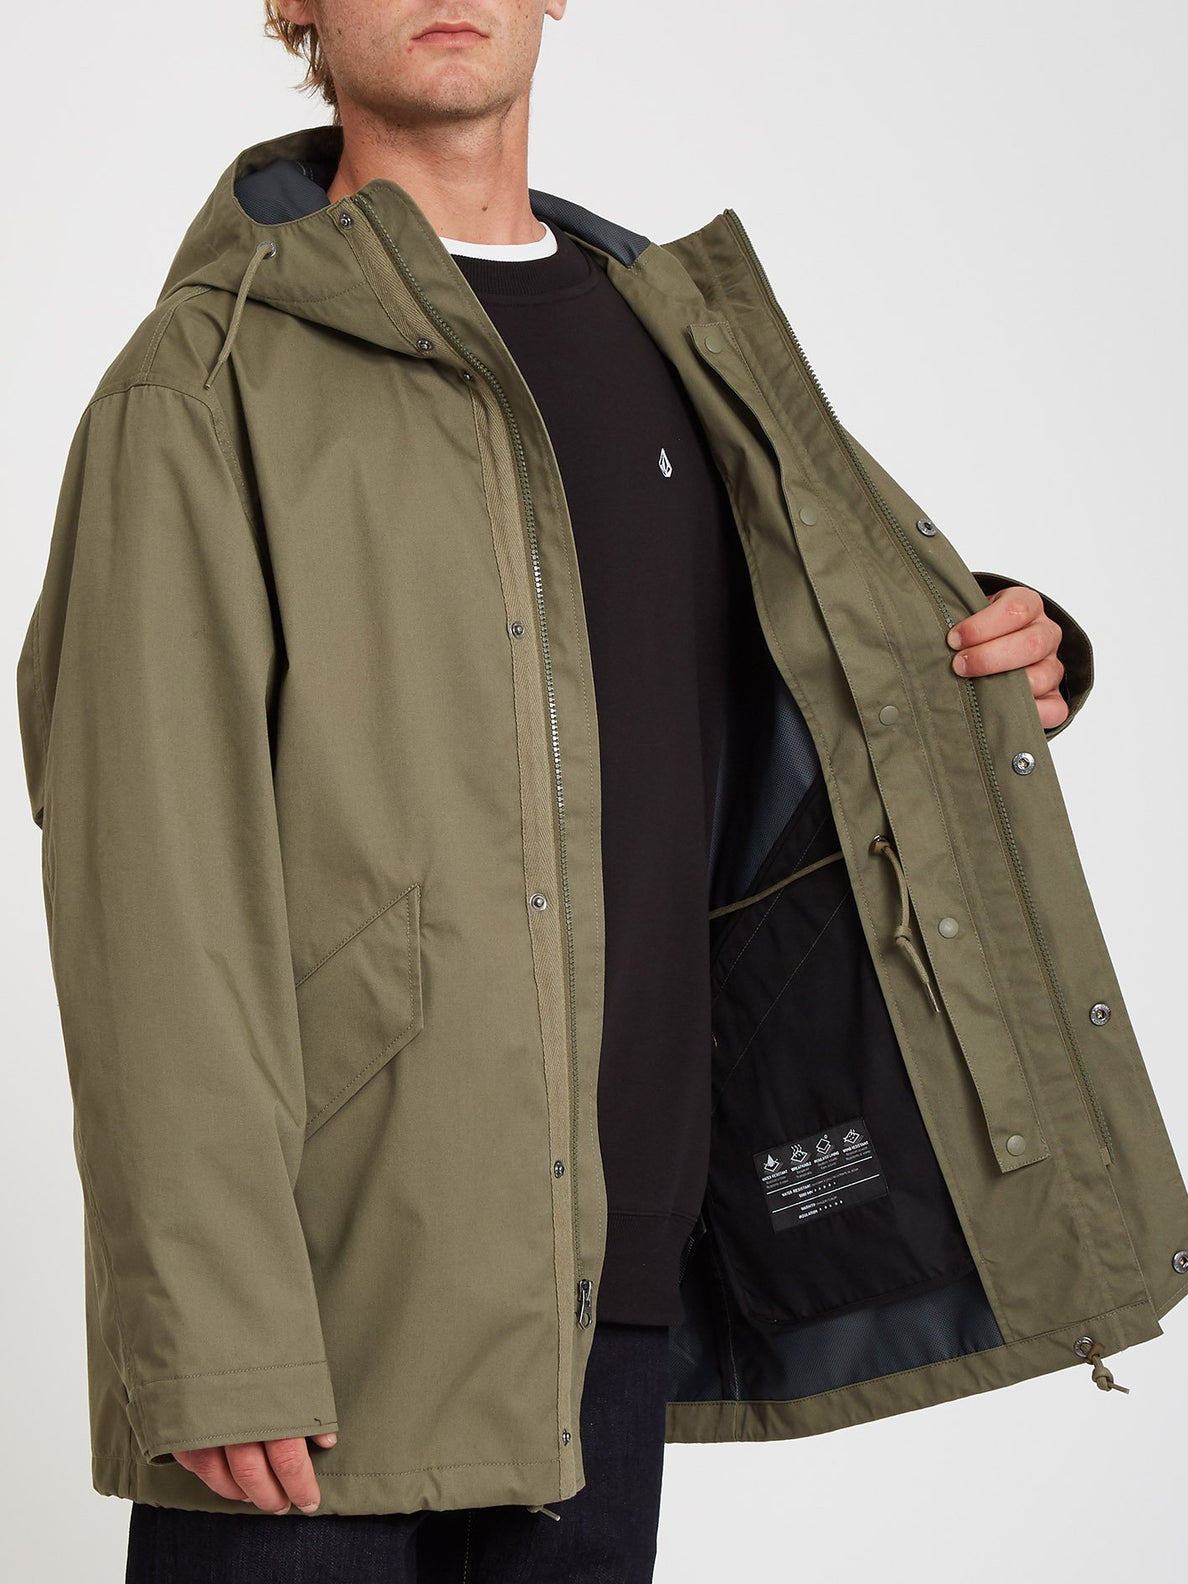 Shadowplay 5K 3In1 Jacket - ARMY GREEN COMBO (A1732106_ARC) [10]